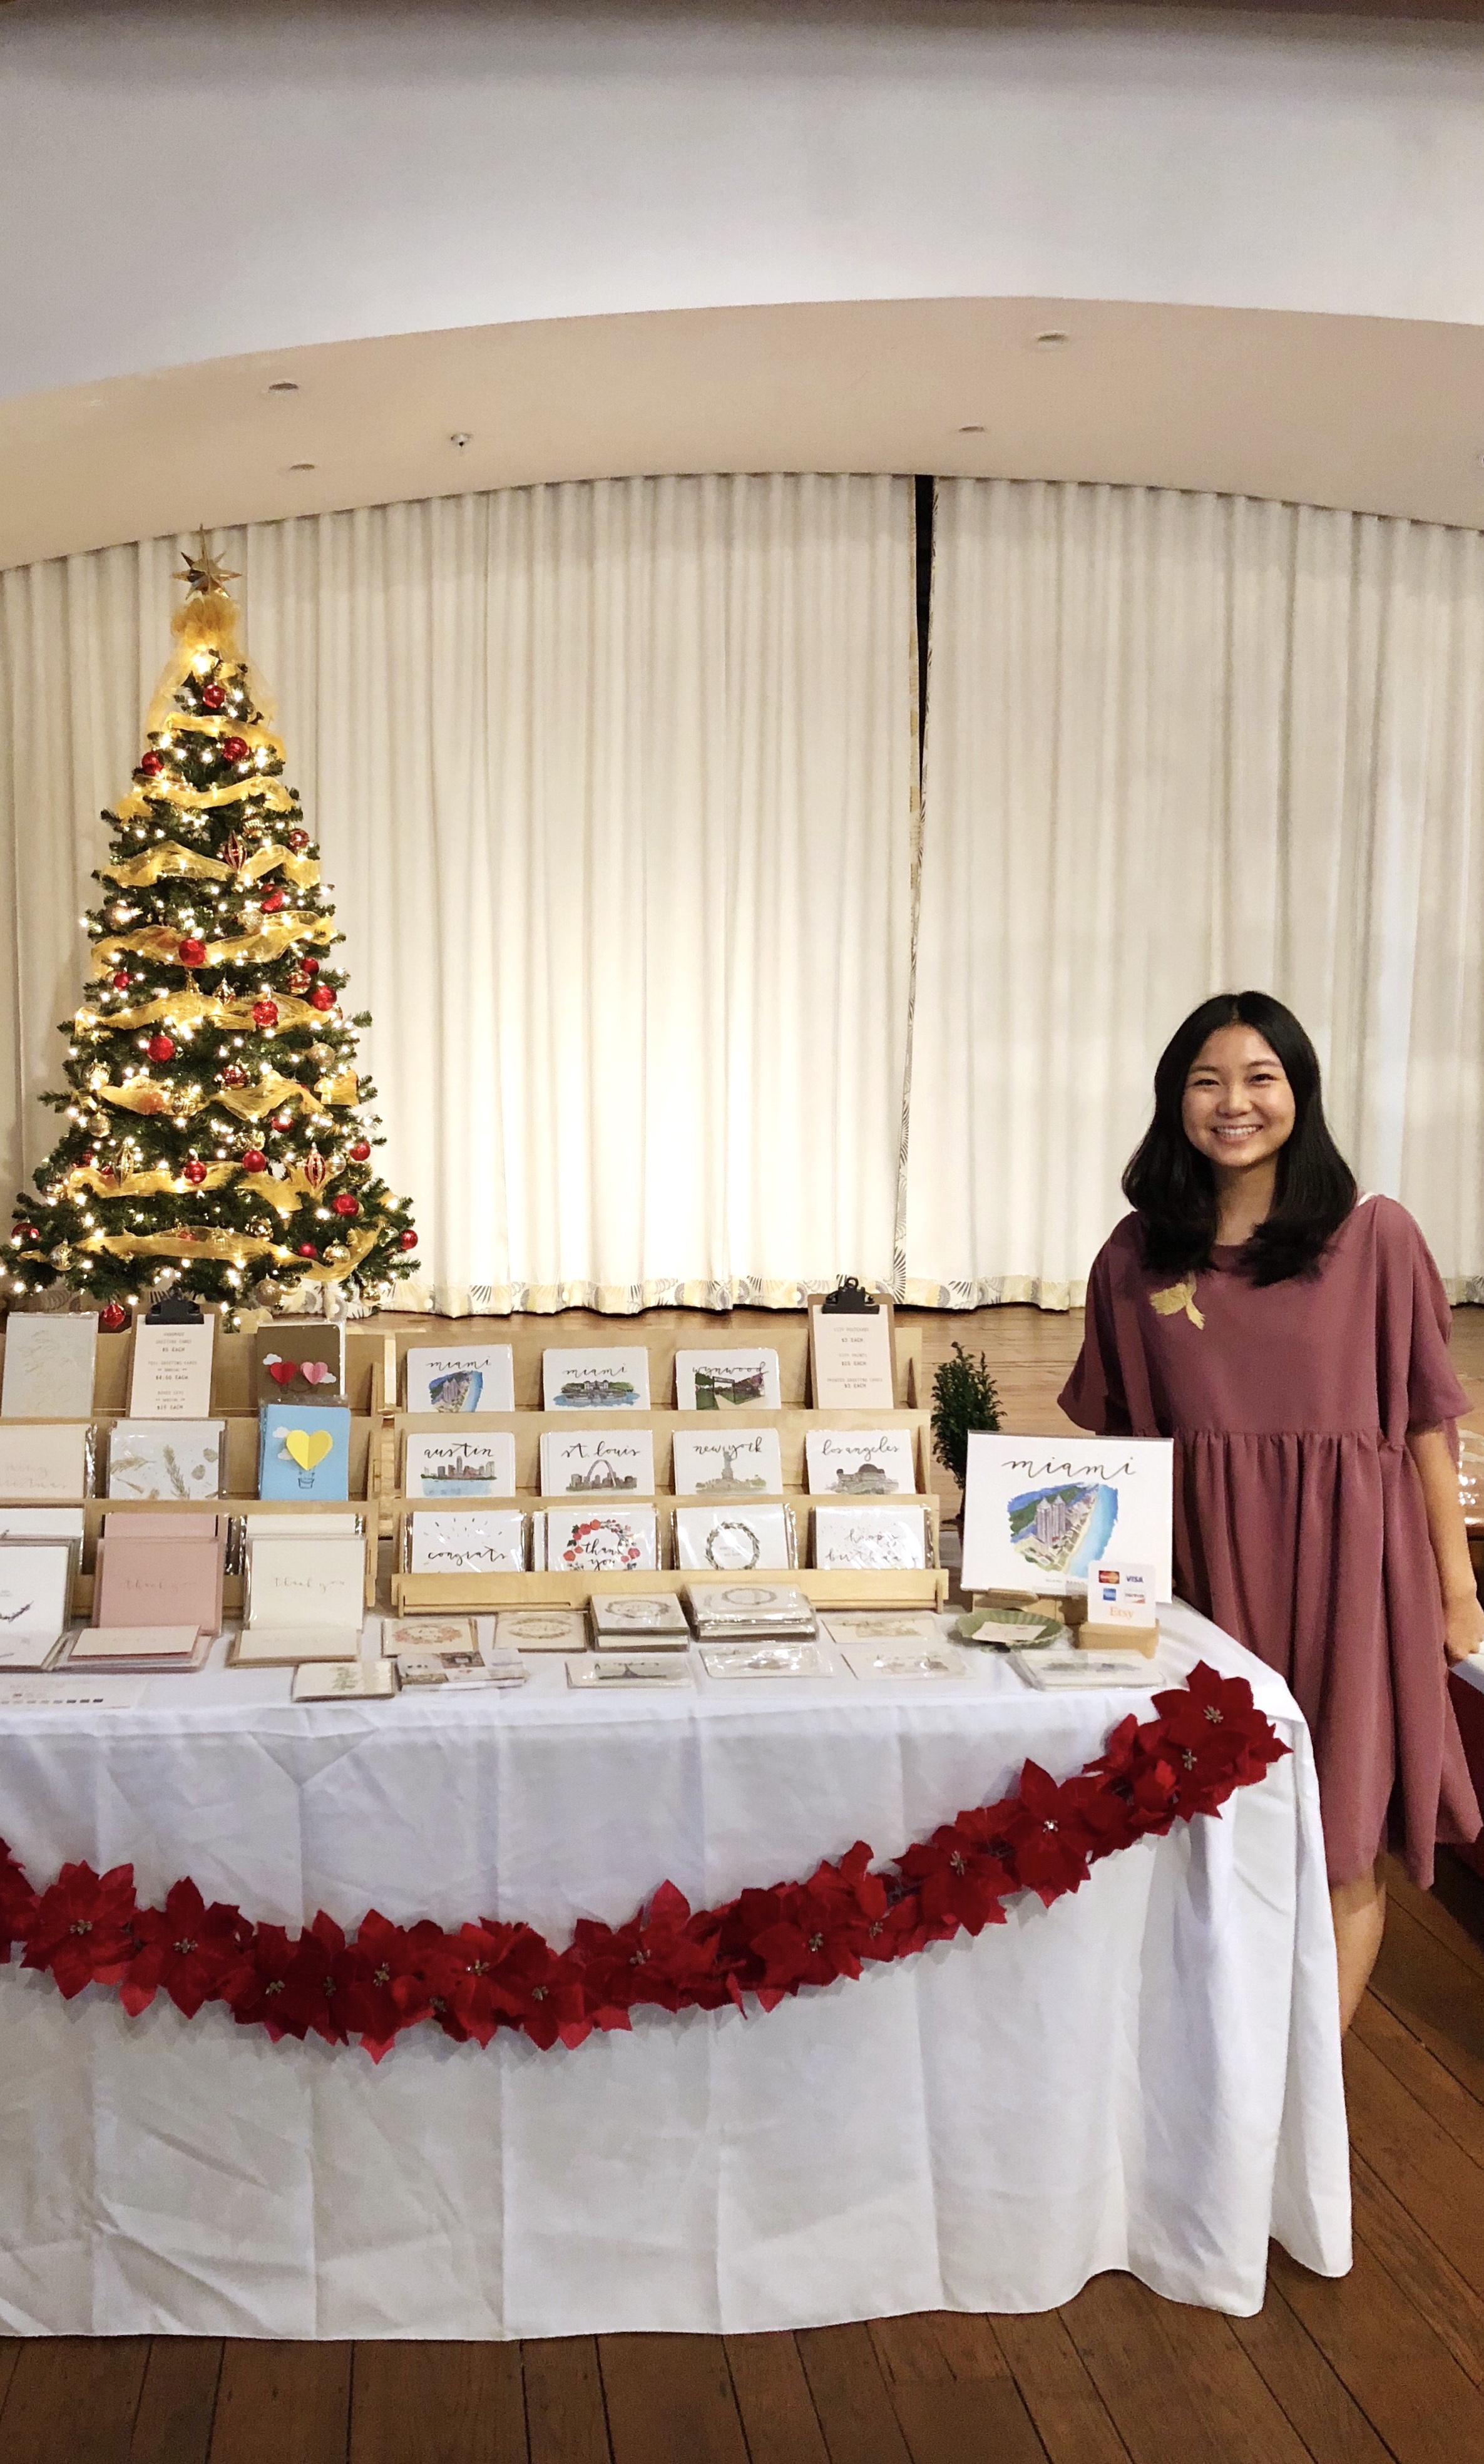 Miami Beach Woman's Club (Holiday Open House and Gift Bazaar)  December 03 2017